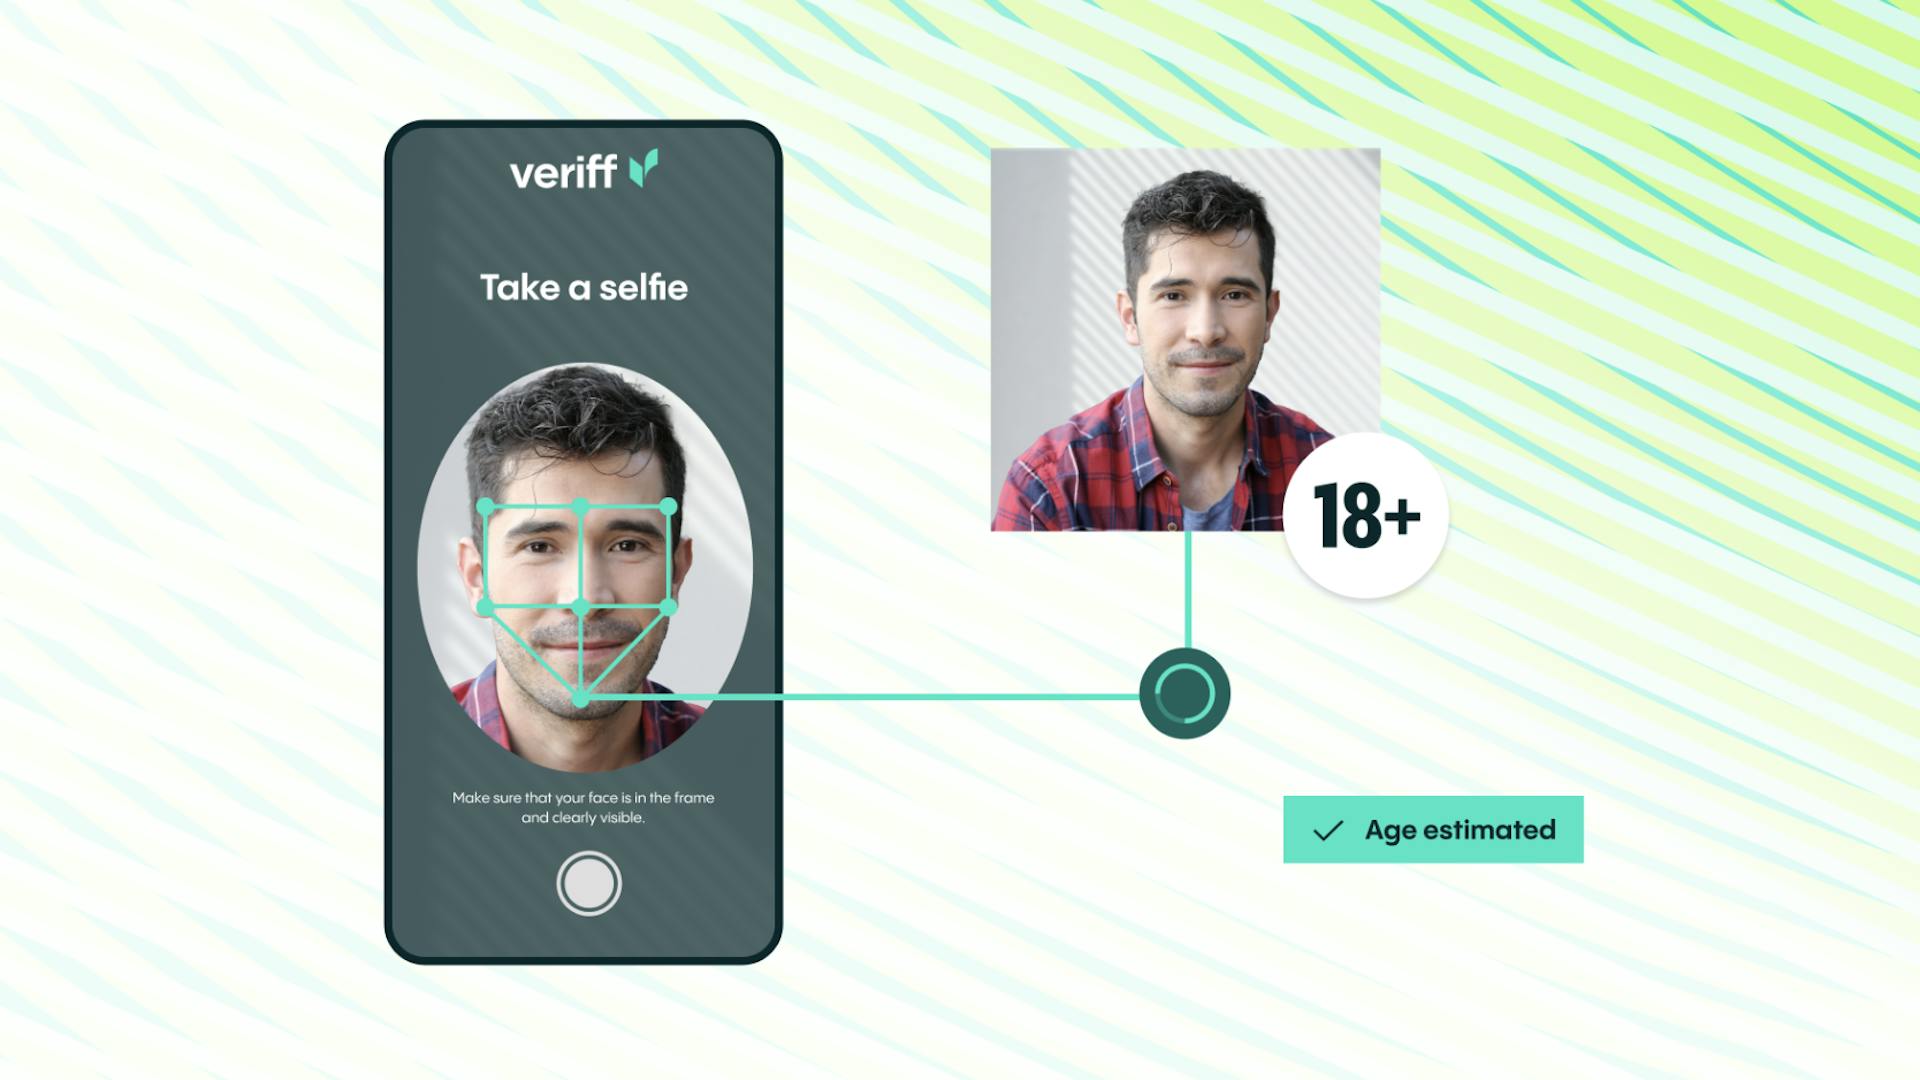 Introducing Age Estimation from Veriff